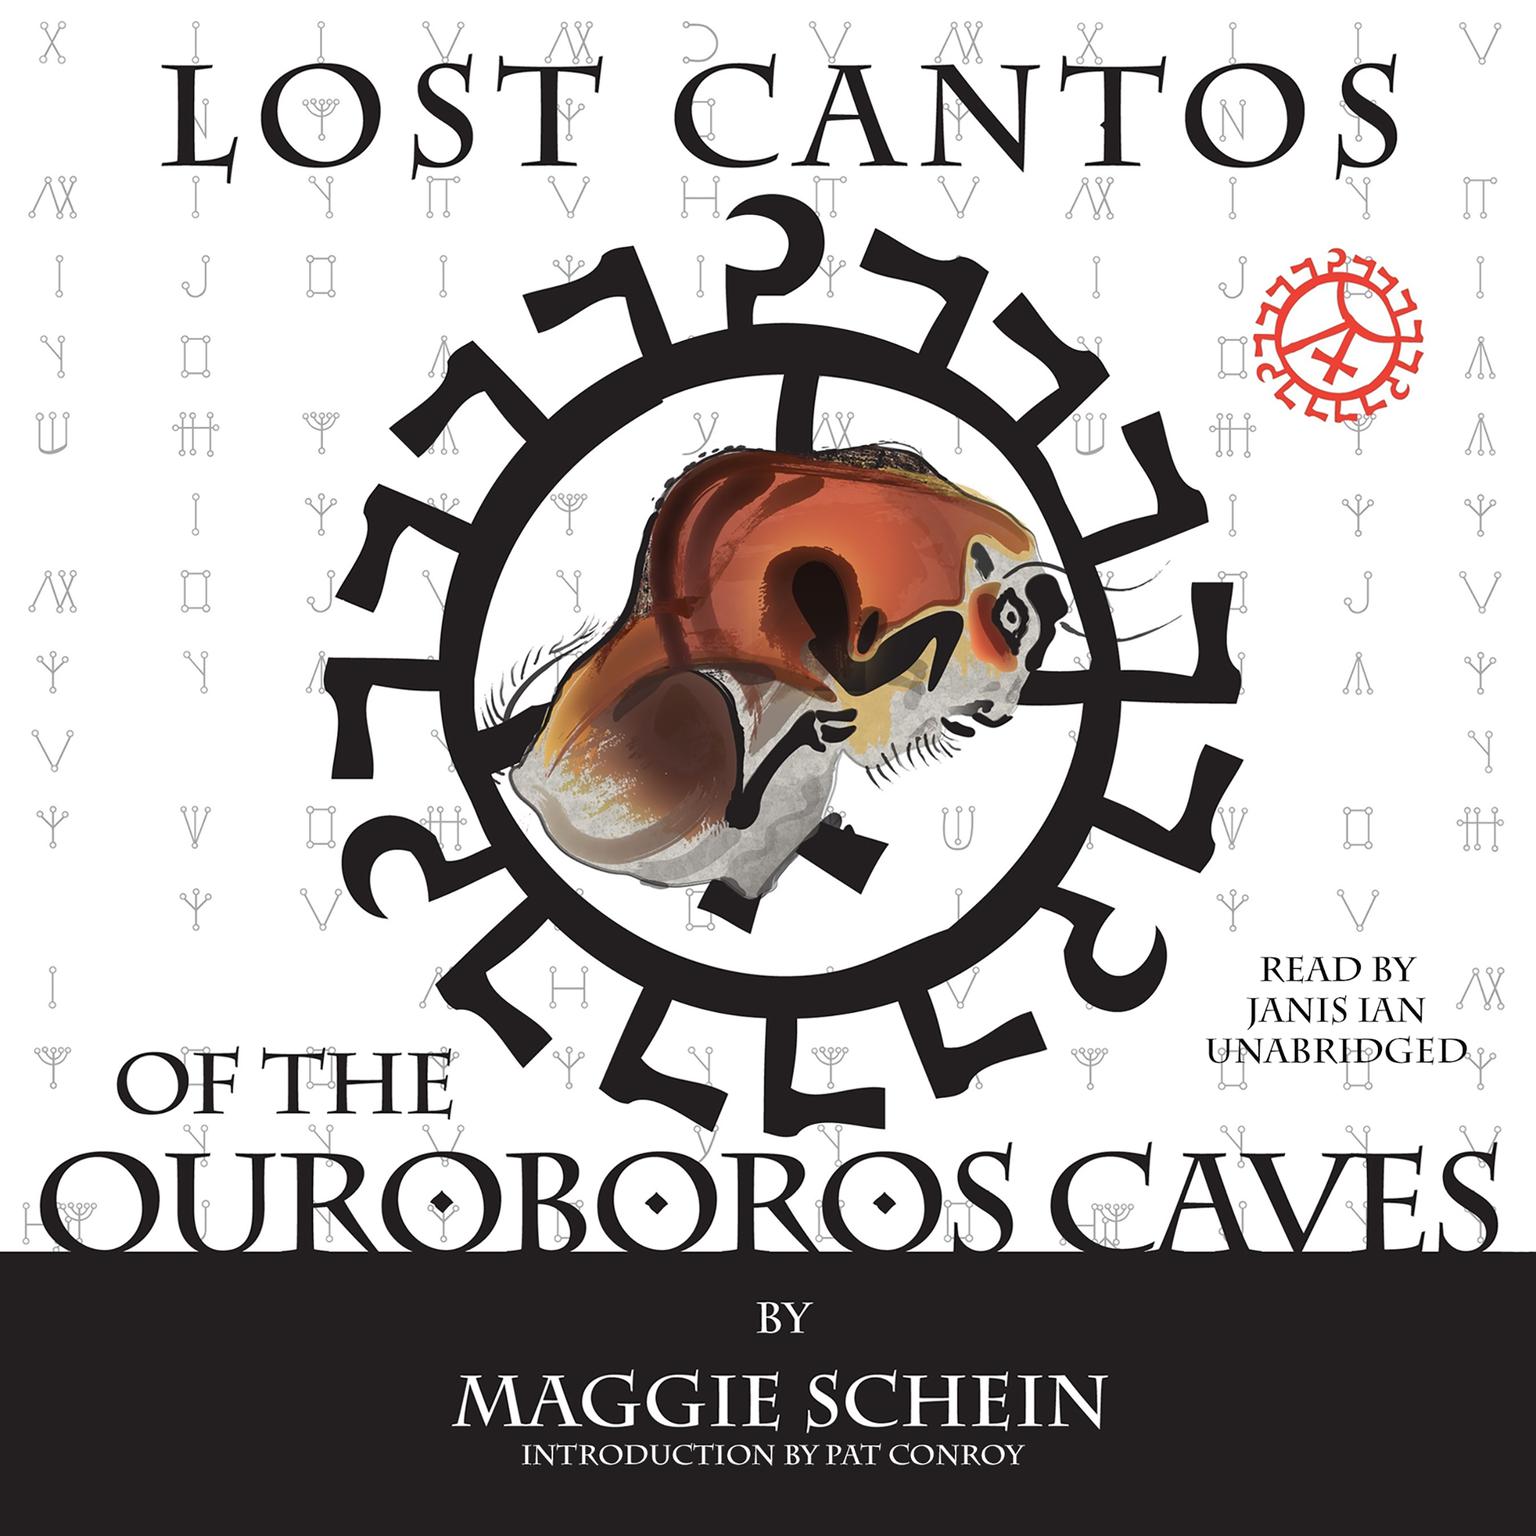 Lost Cantos of the Ouroboros Caves Audiobook, by Maggie Schein